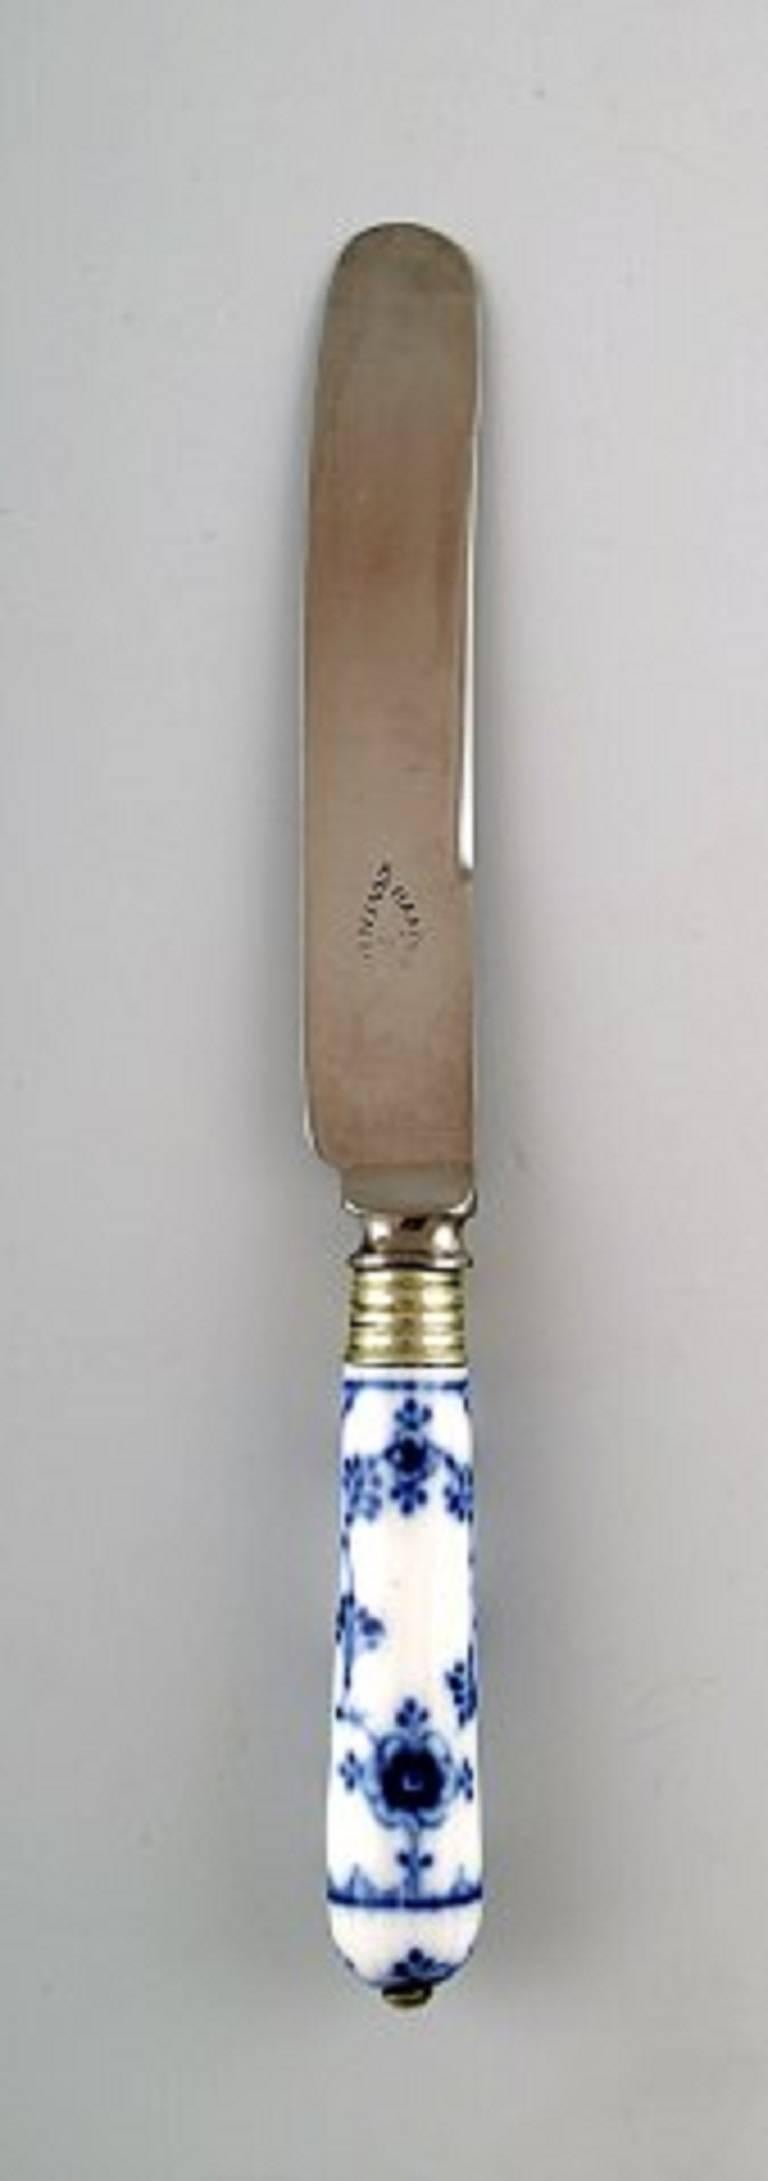 Neoclassical Blue Fluted Plain, 6 Knives from Royal Copenhagen / Raadvad, Early 1900s